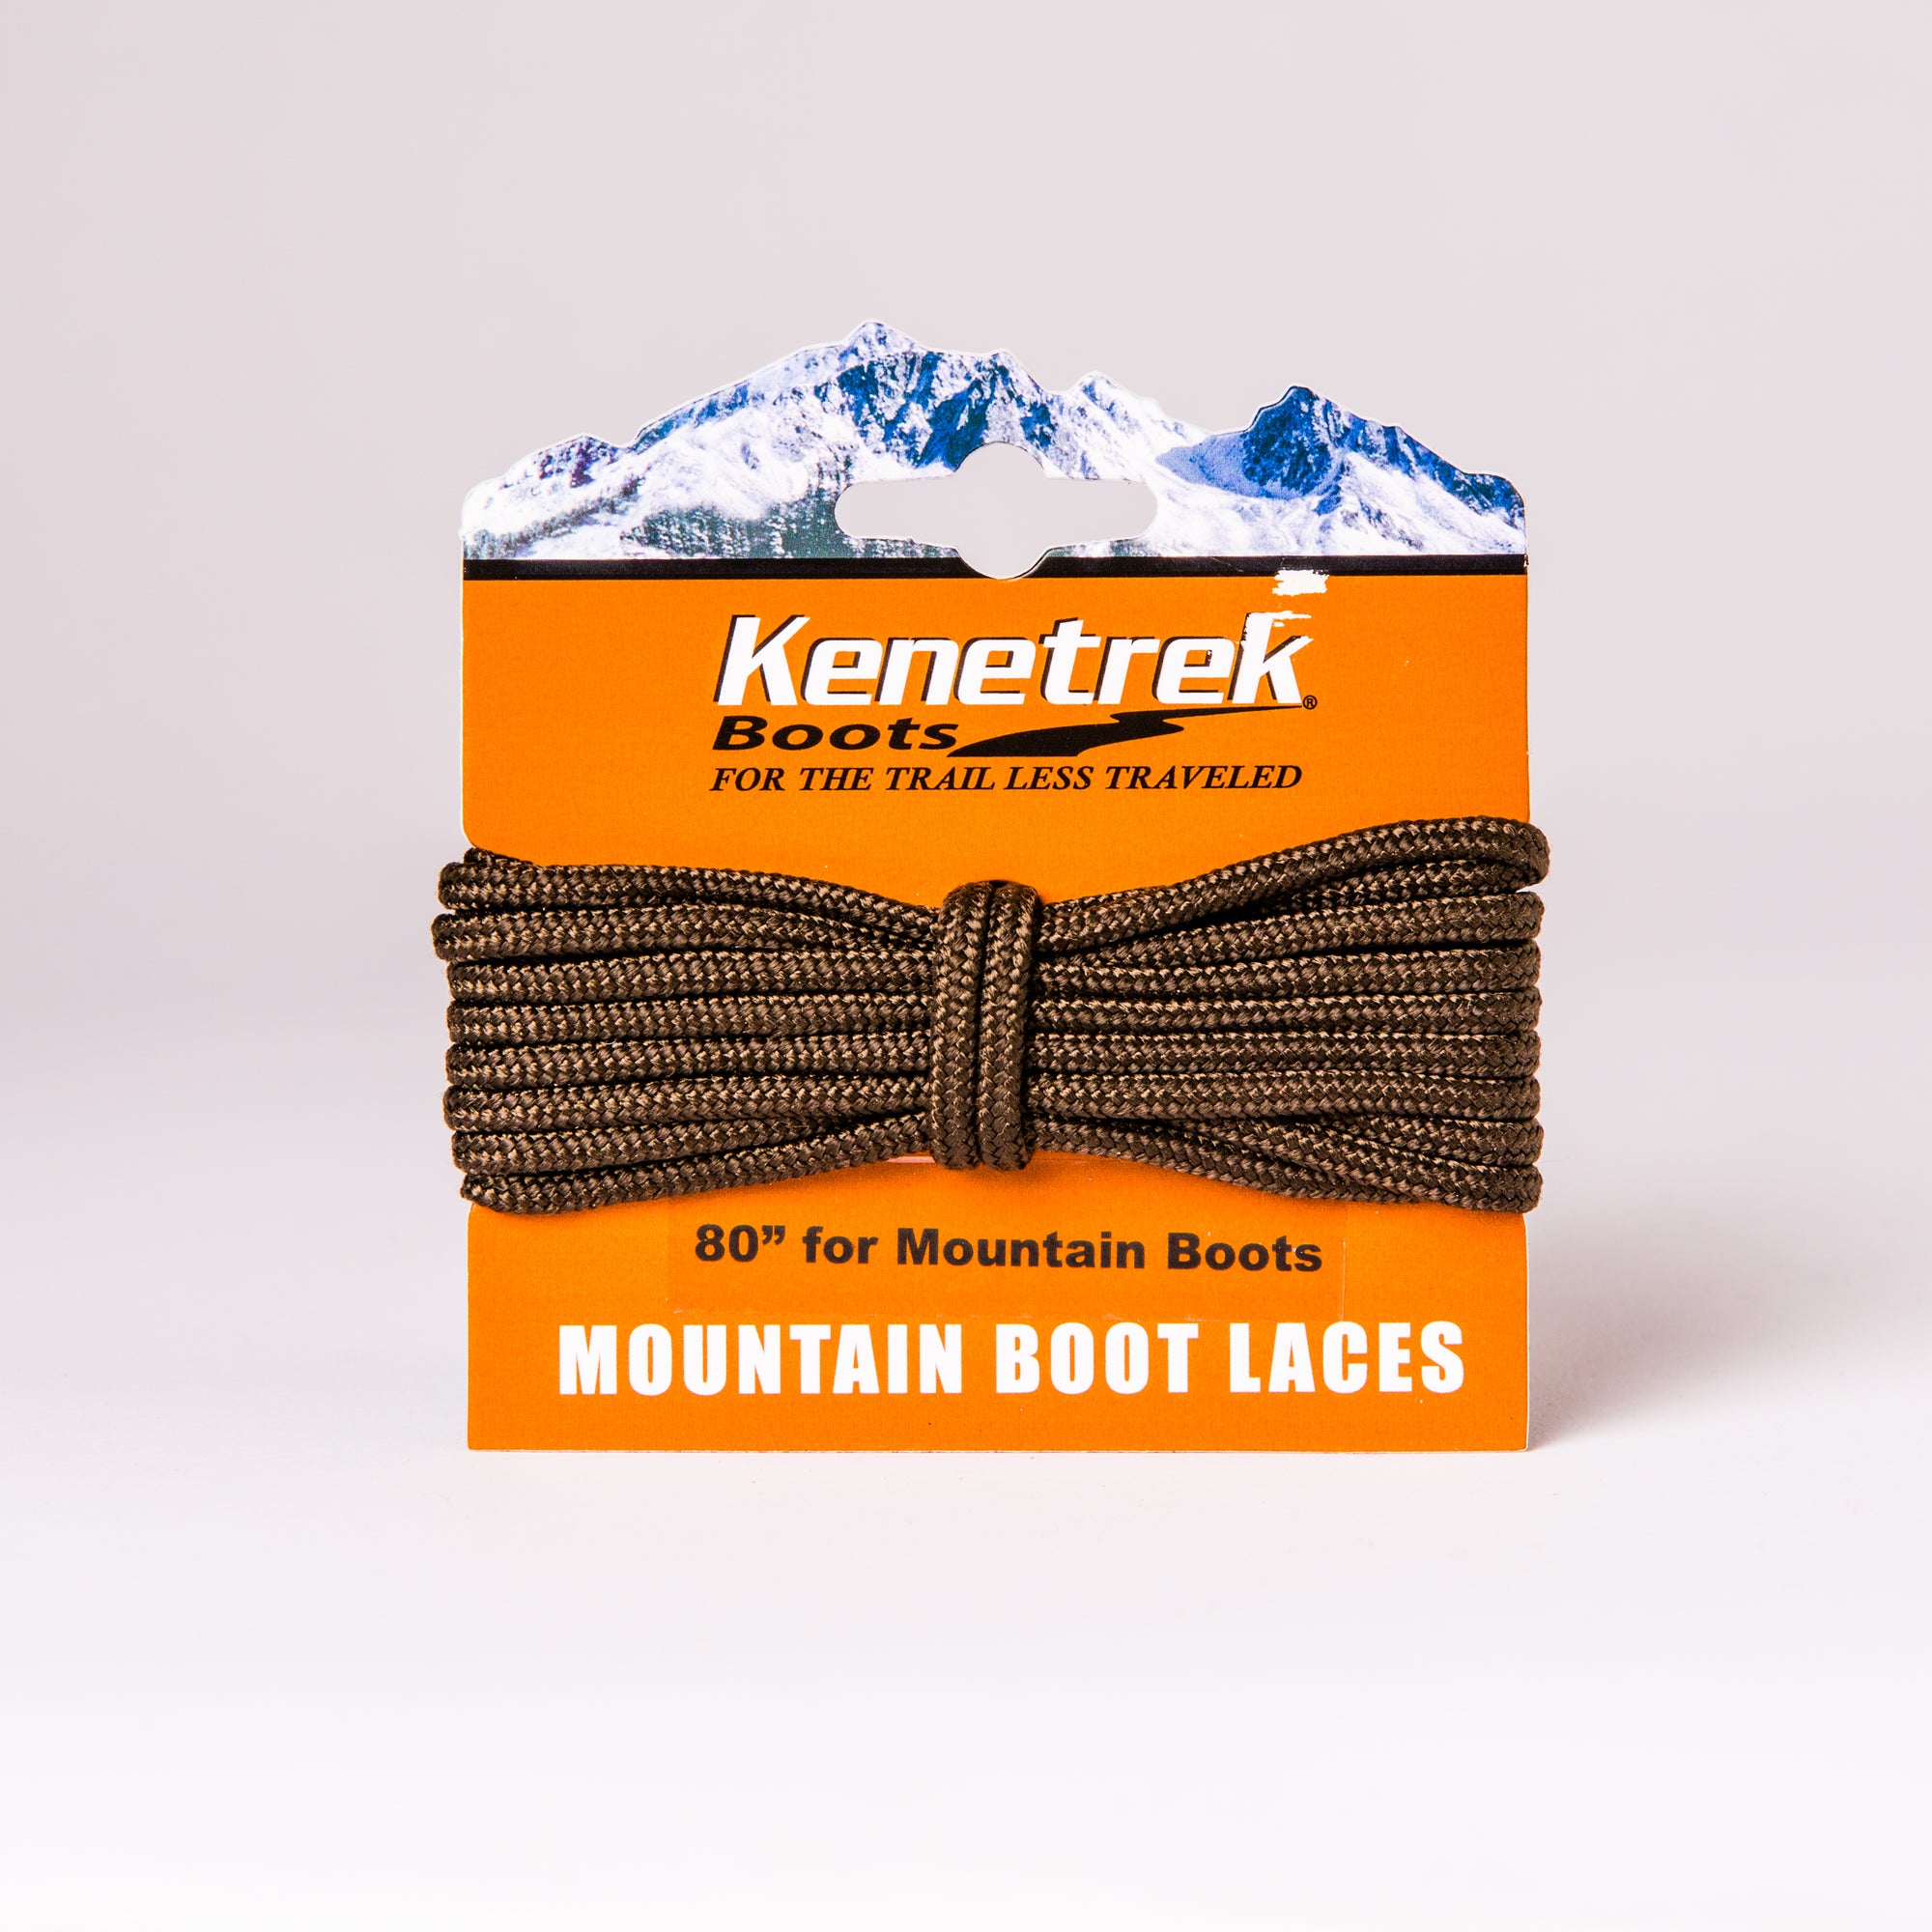 Kenetrek Mountain Boot Laces 80” for Mountain Boots